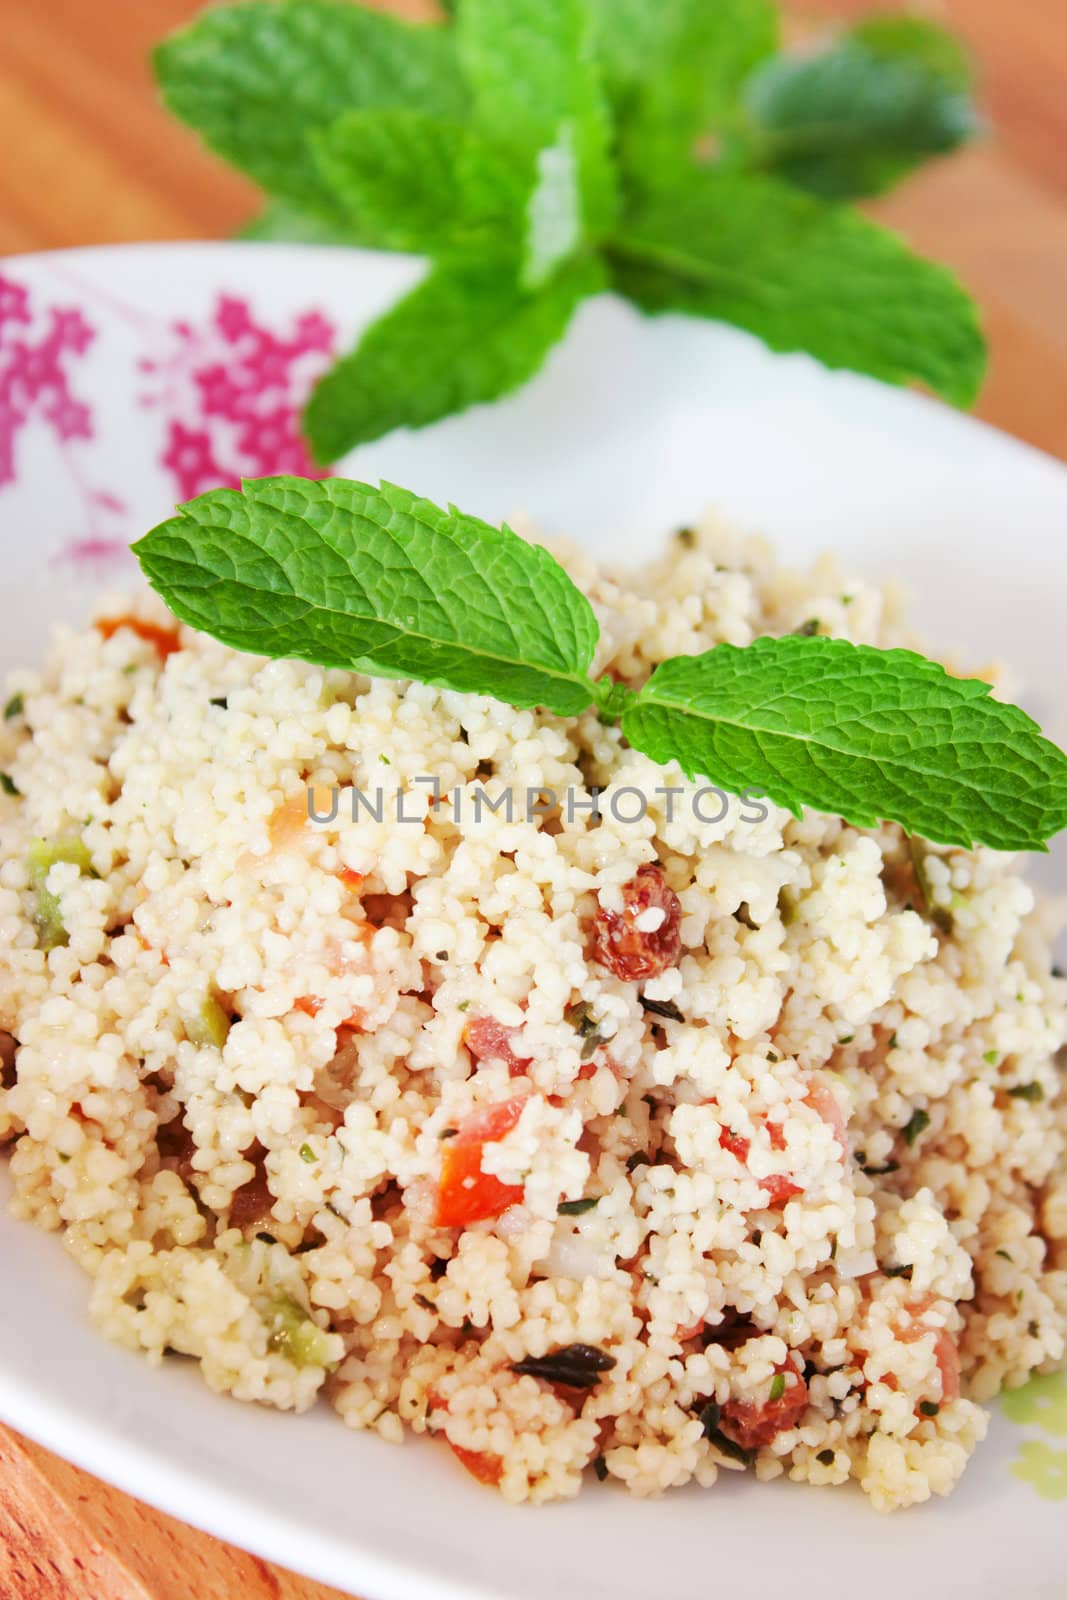 Delicious Tabbouleh with its mint leaf